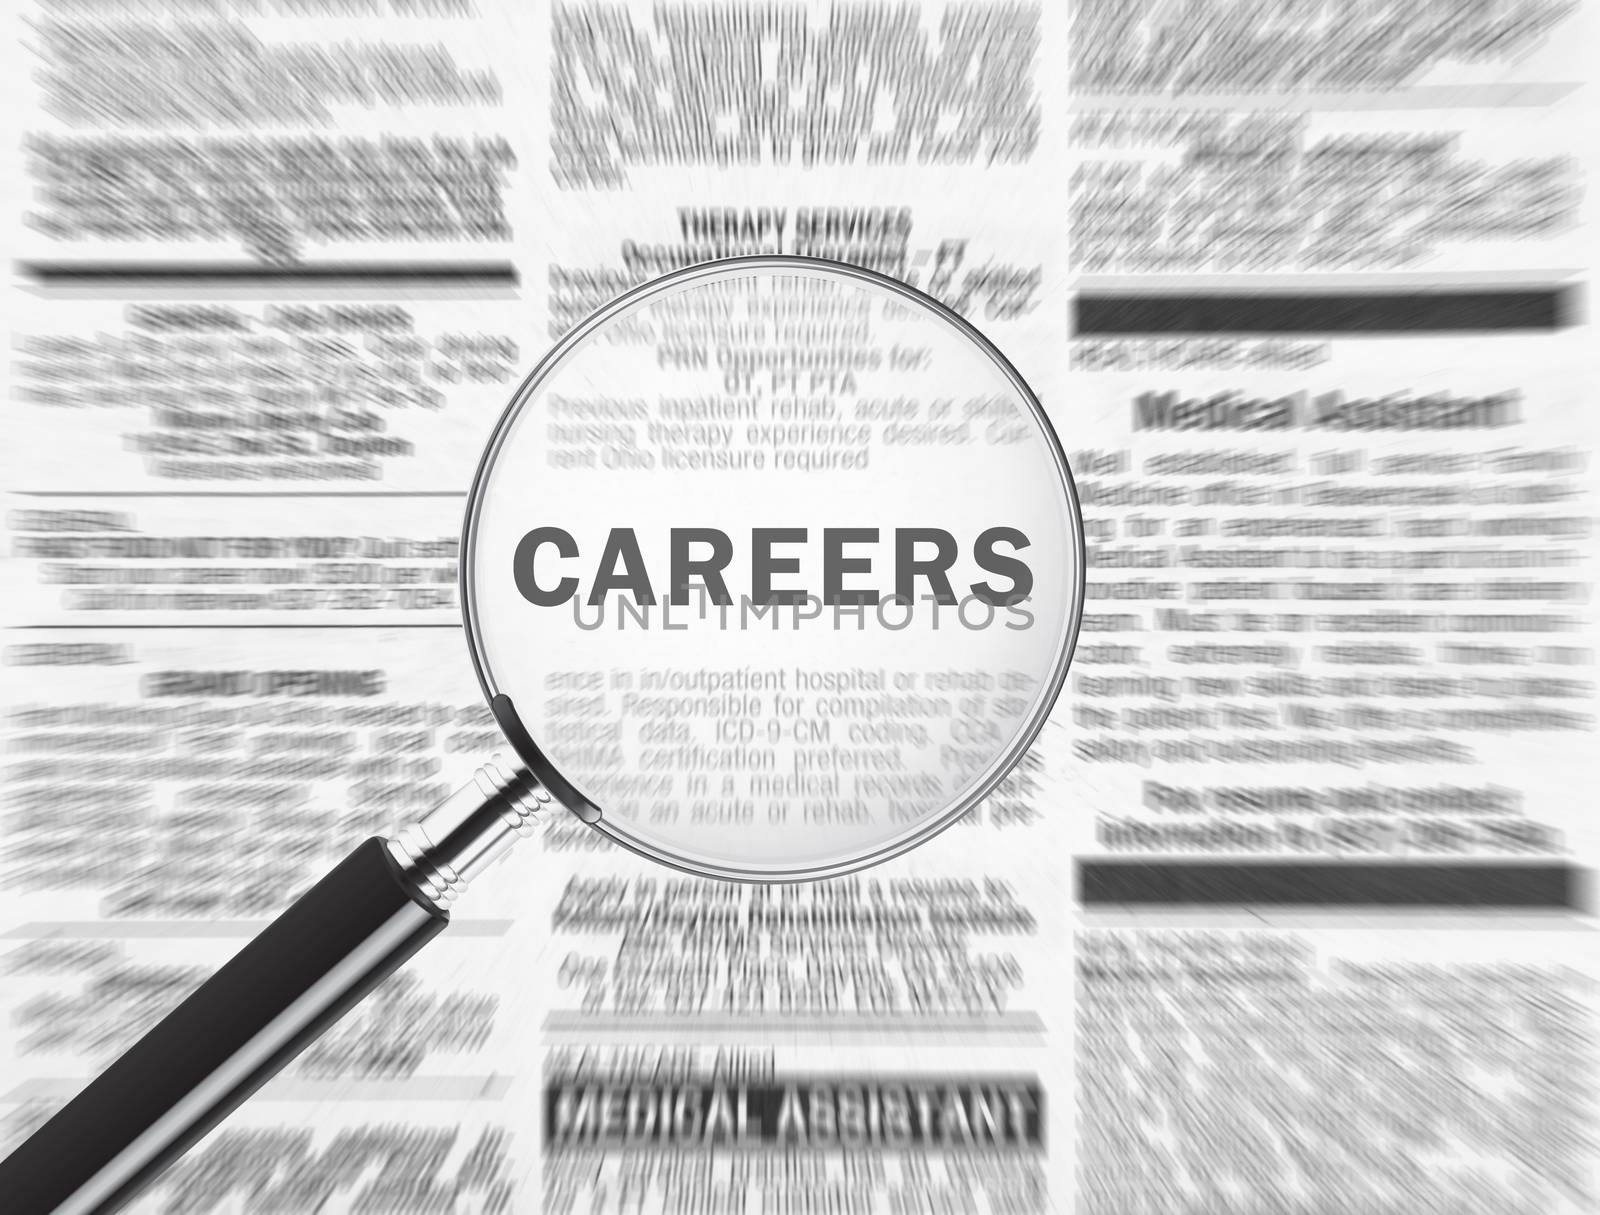 Careers ad through a magnifying glass